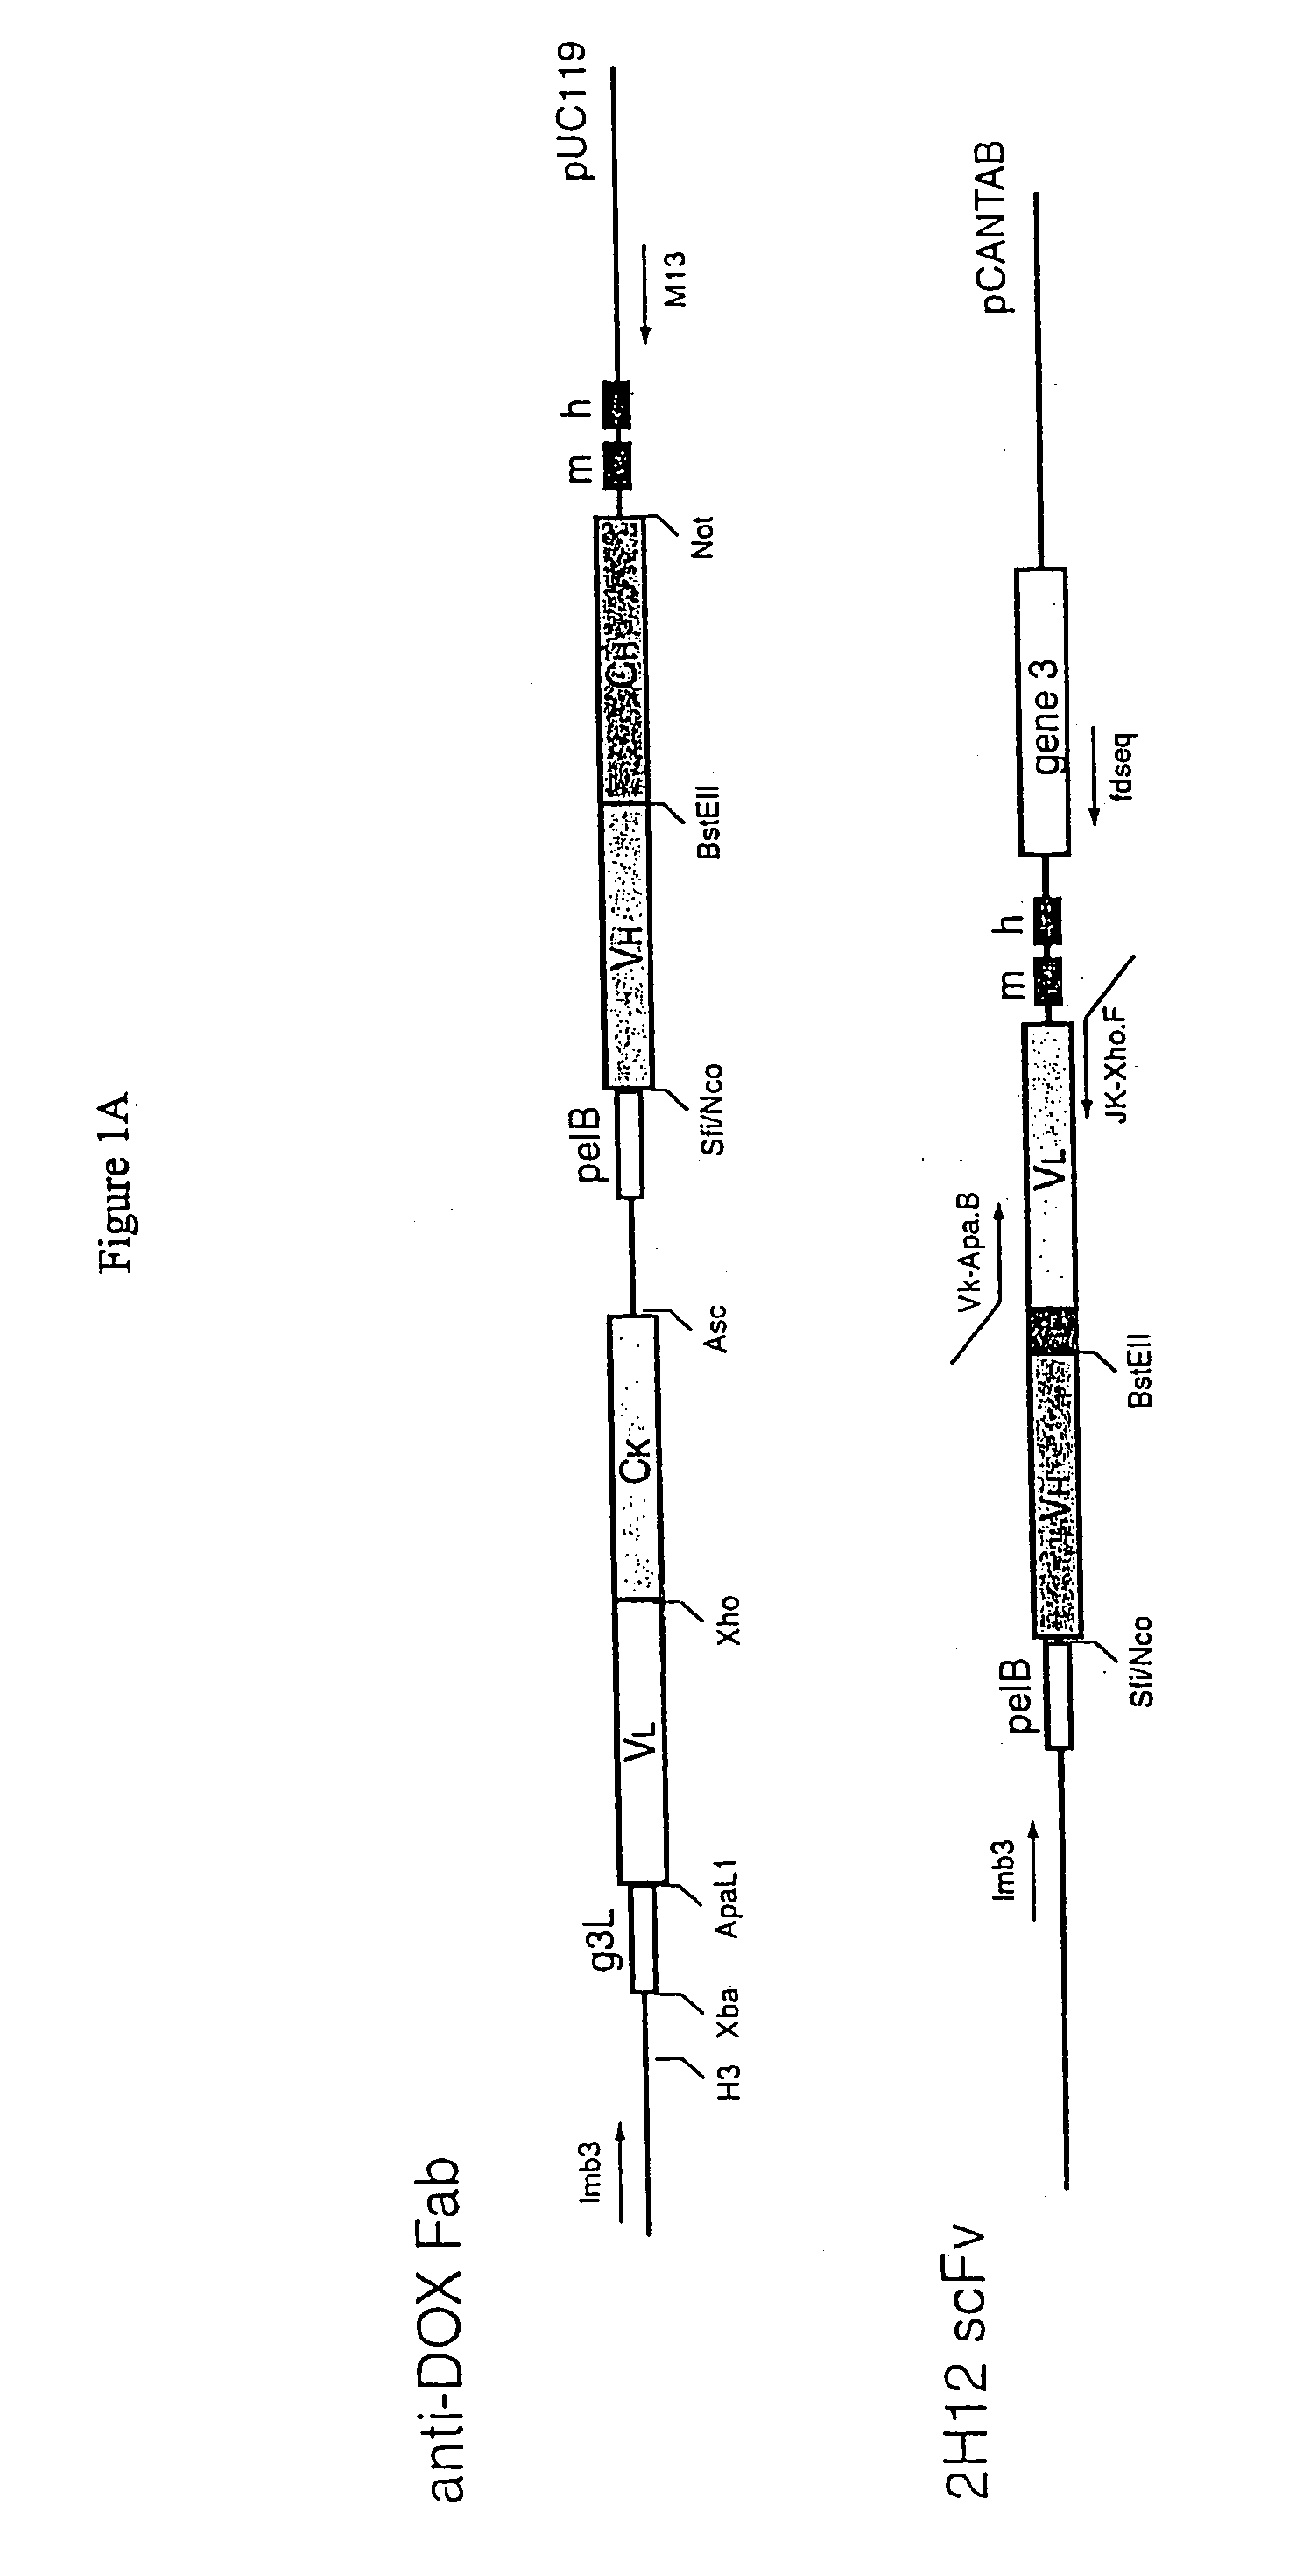 Methods and reagents for identifying rare fetal cells in the maternal circulation